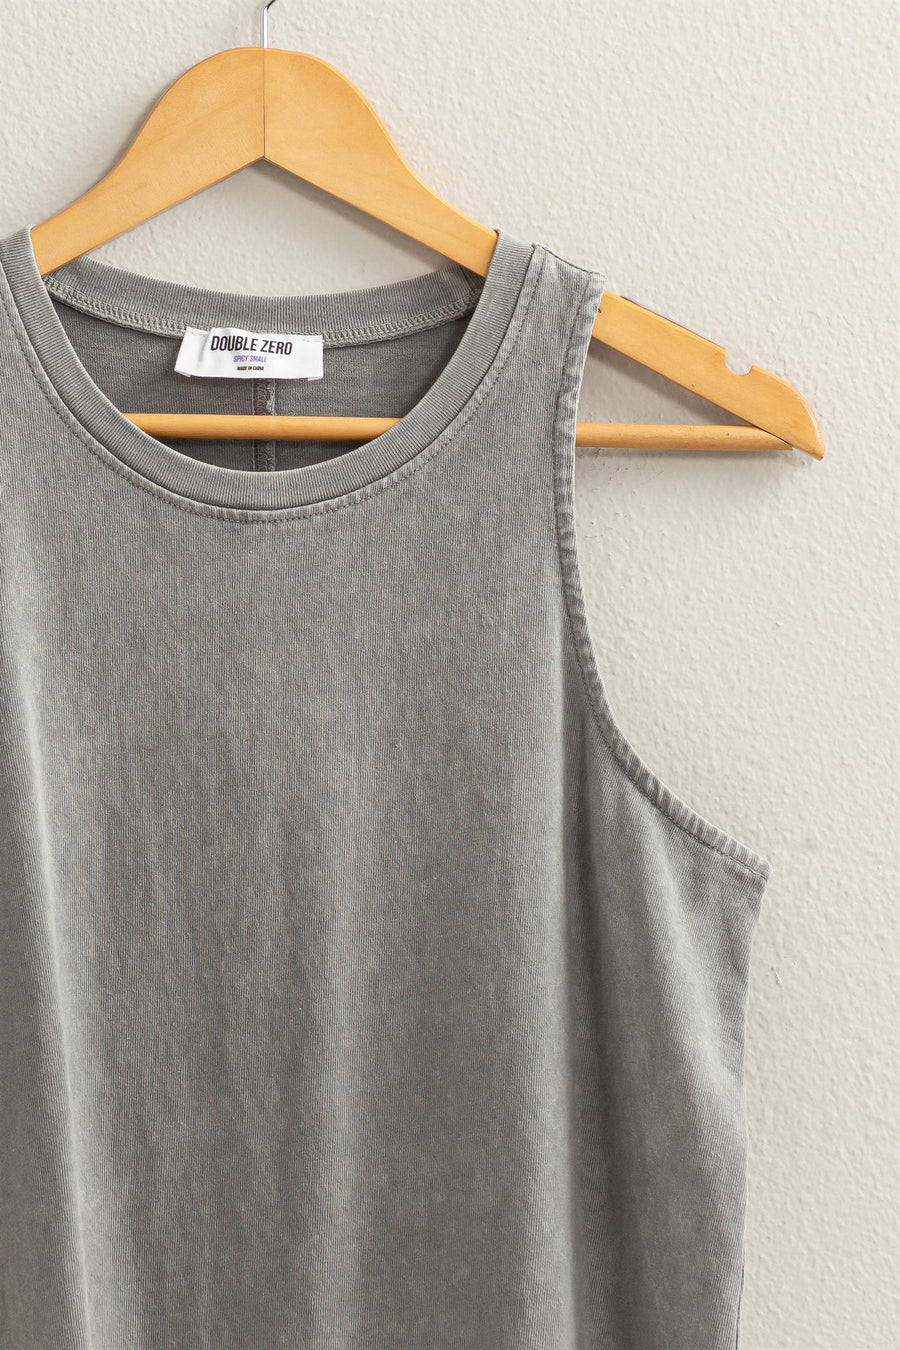 HYFVE INC. Women's Top GREY / S Mineral Washed Sleeveless Top || David's Clothing DZ24A856